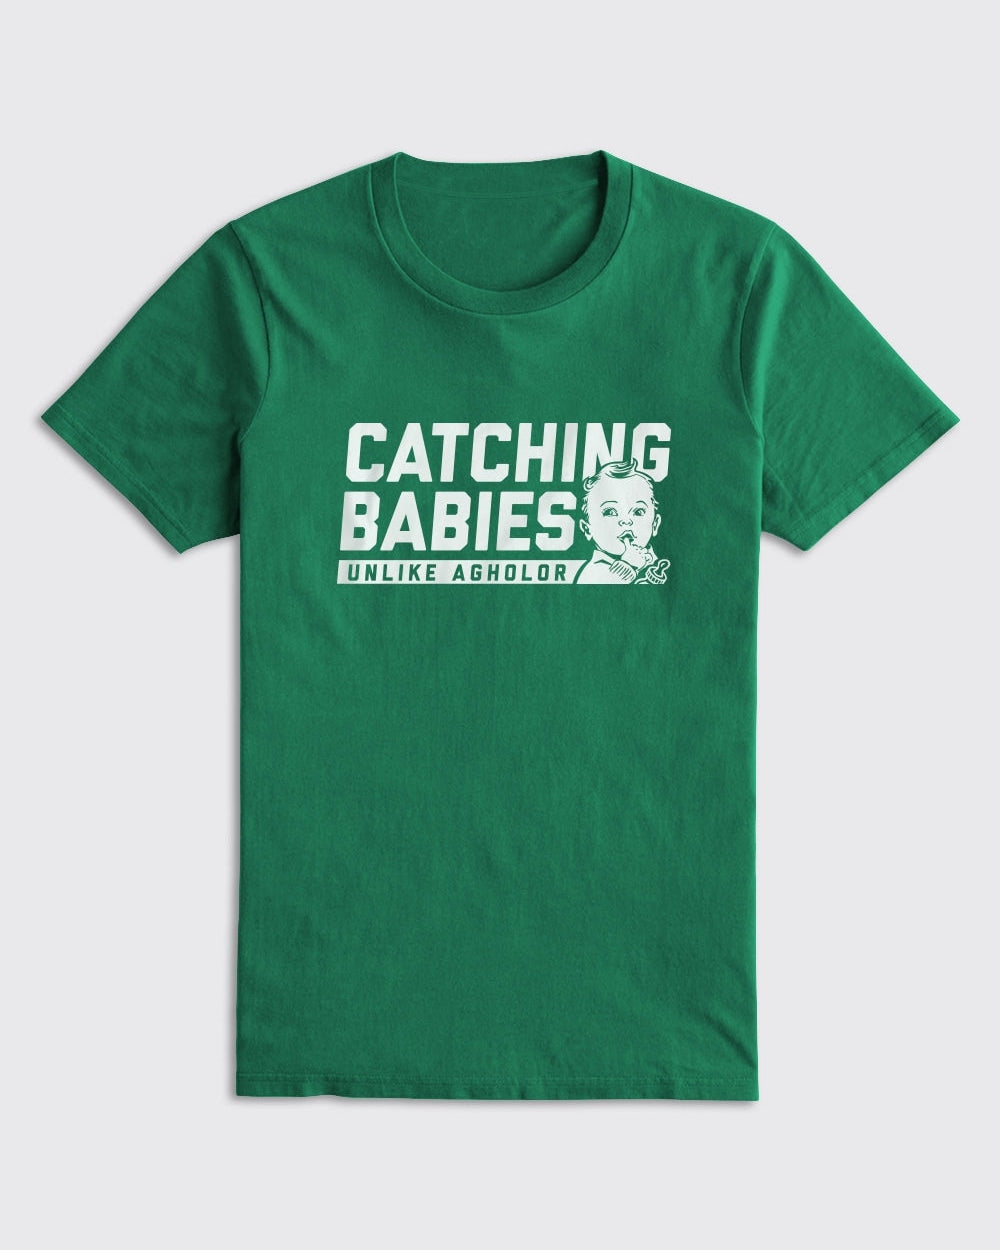 Catching Babies Unlike Agholor Shirt - Eagles, T-Shirts - Philly Sports Shirts